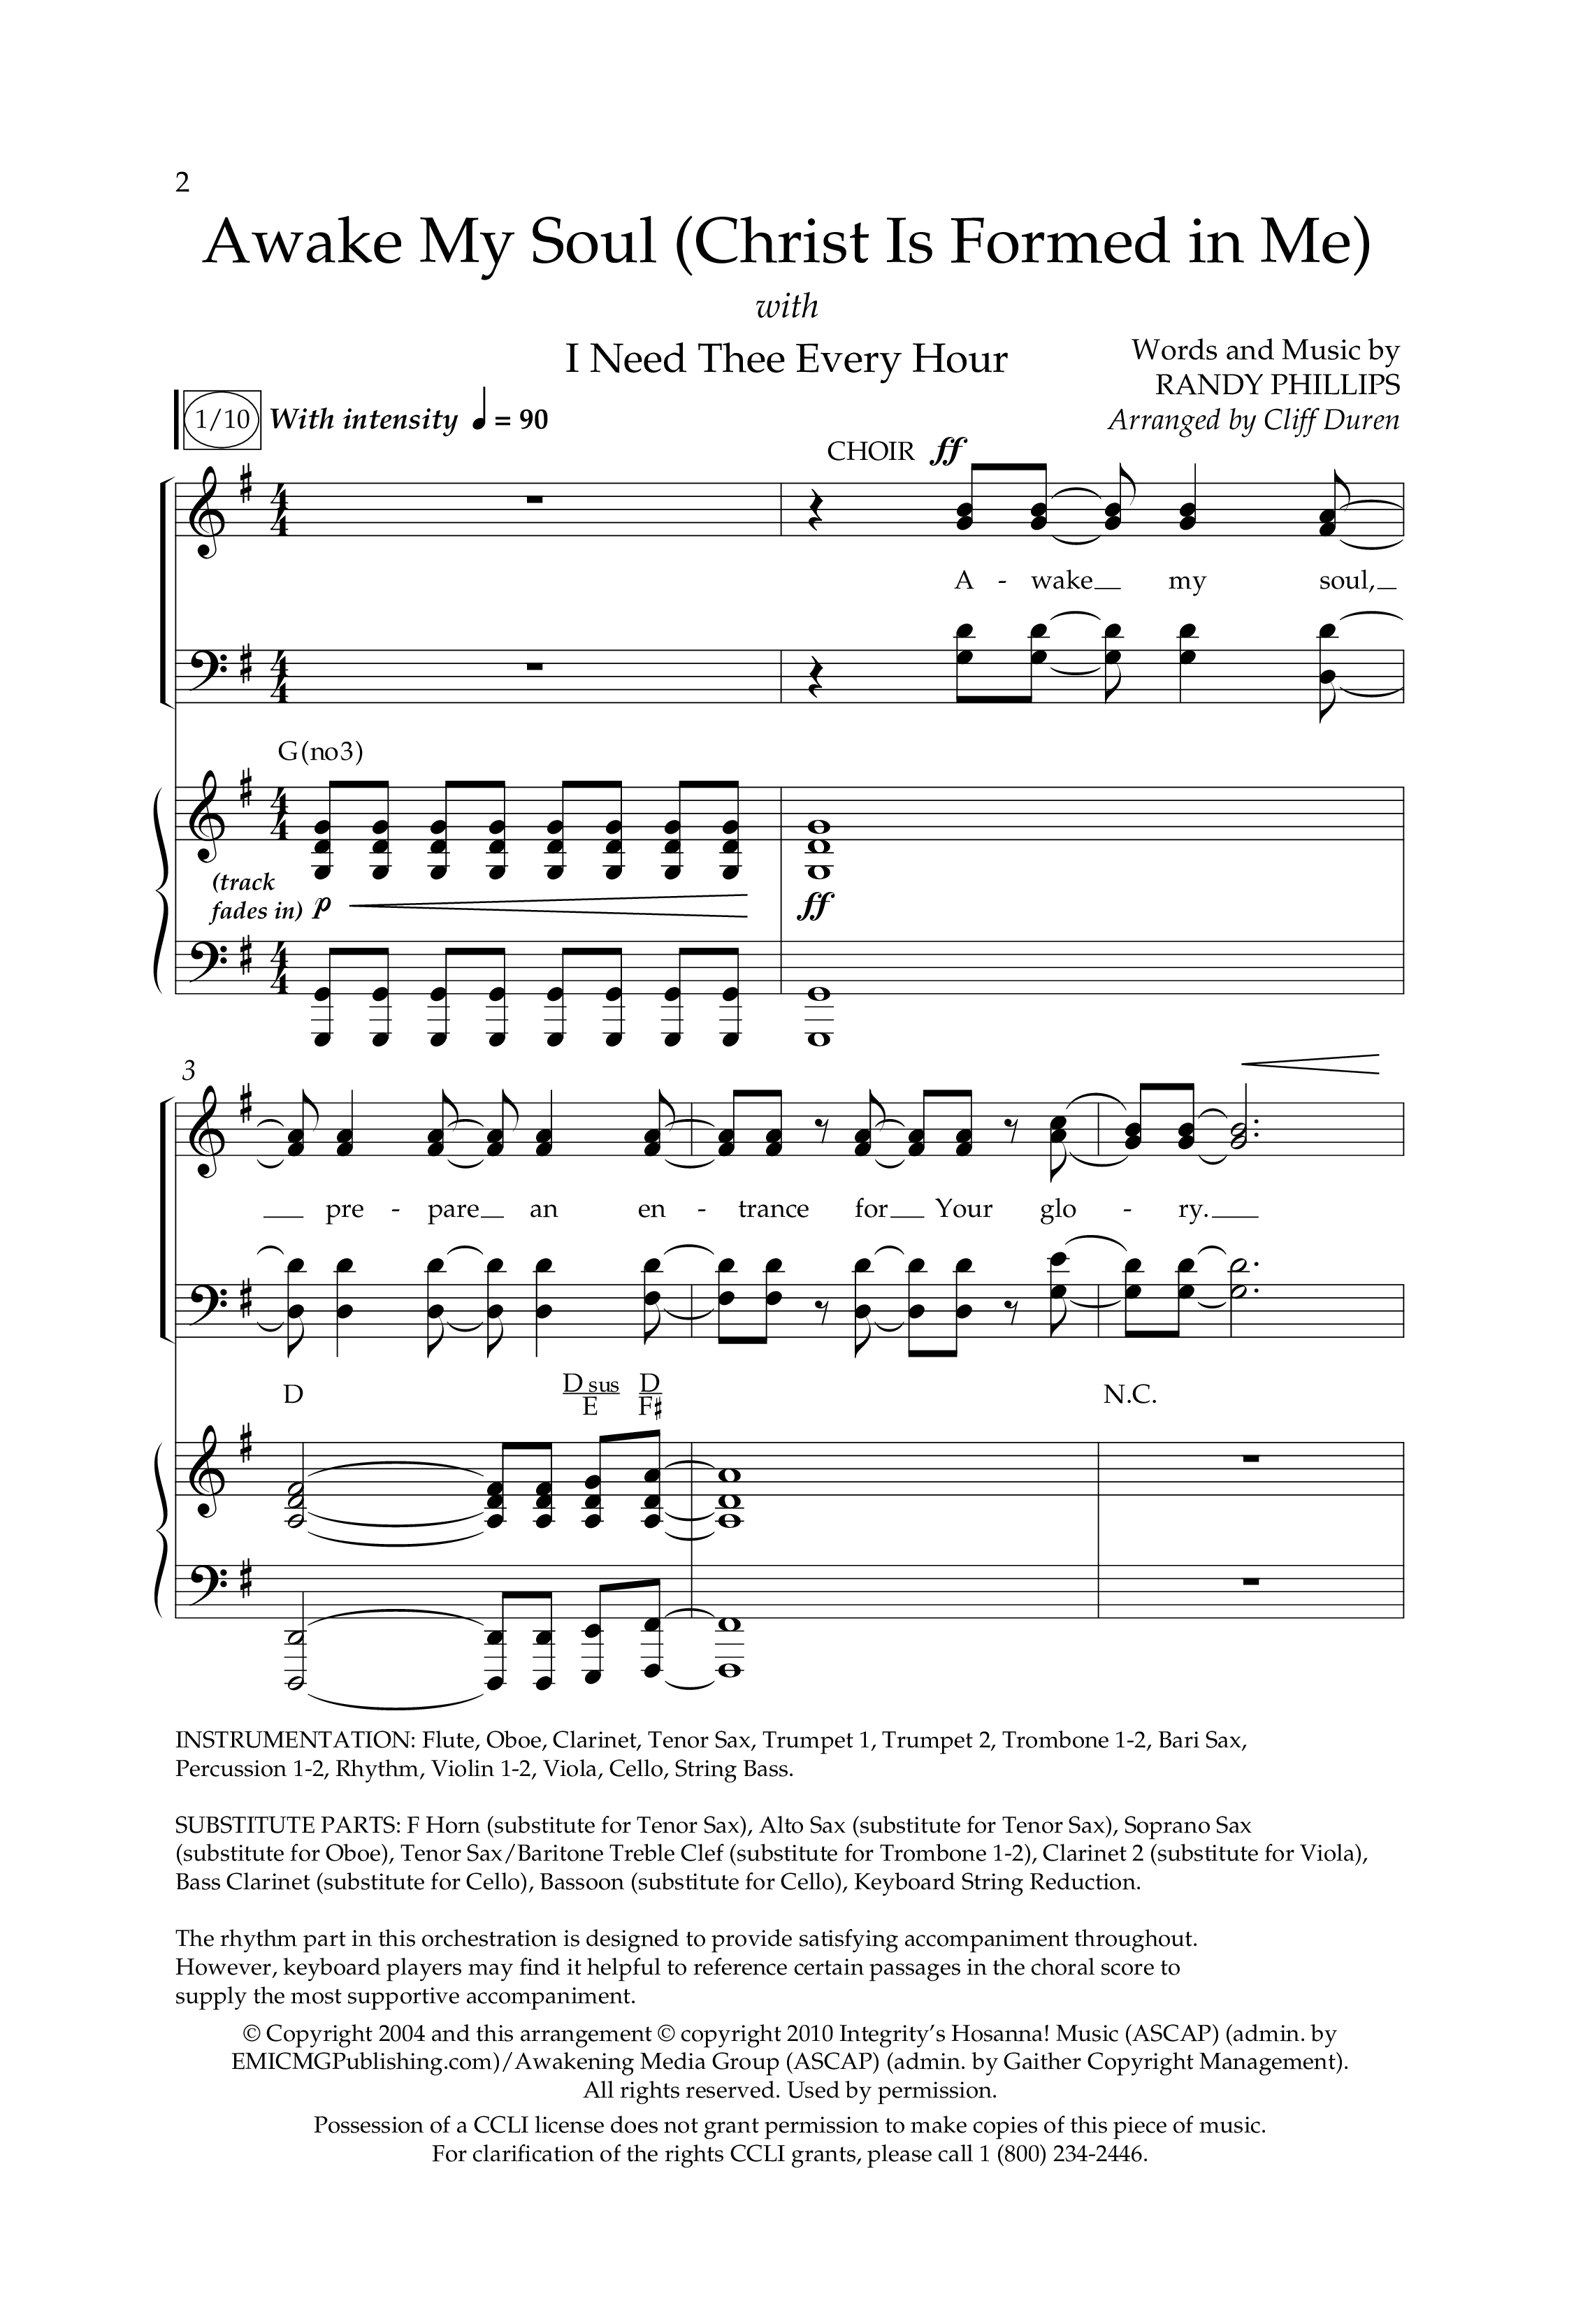 Awake My Soul (Christ Is Formed In Me) with I Need Thee Every Hour (Choral Anthem SATB) Anthem (SATB/Piano) (Lifeway Choral / Arr. Cliff Duren)